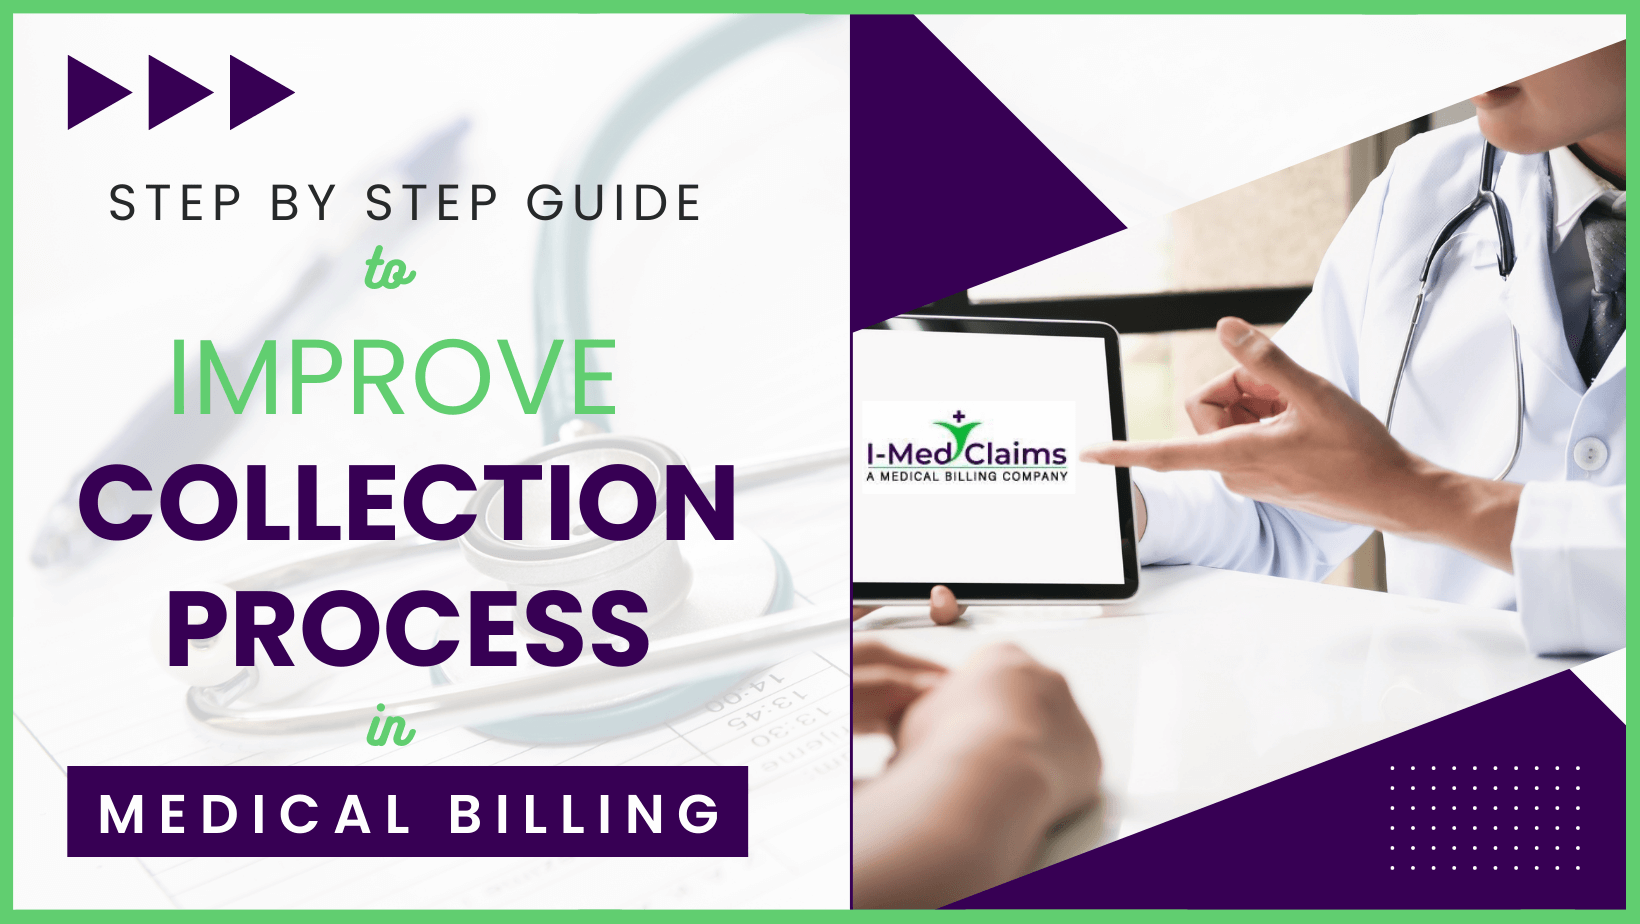 Step by Step Guide to Improving Collection Process in Medical Billing